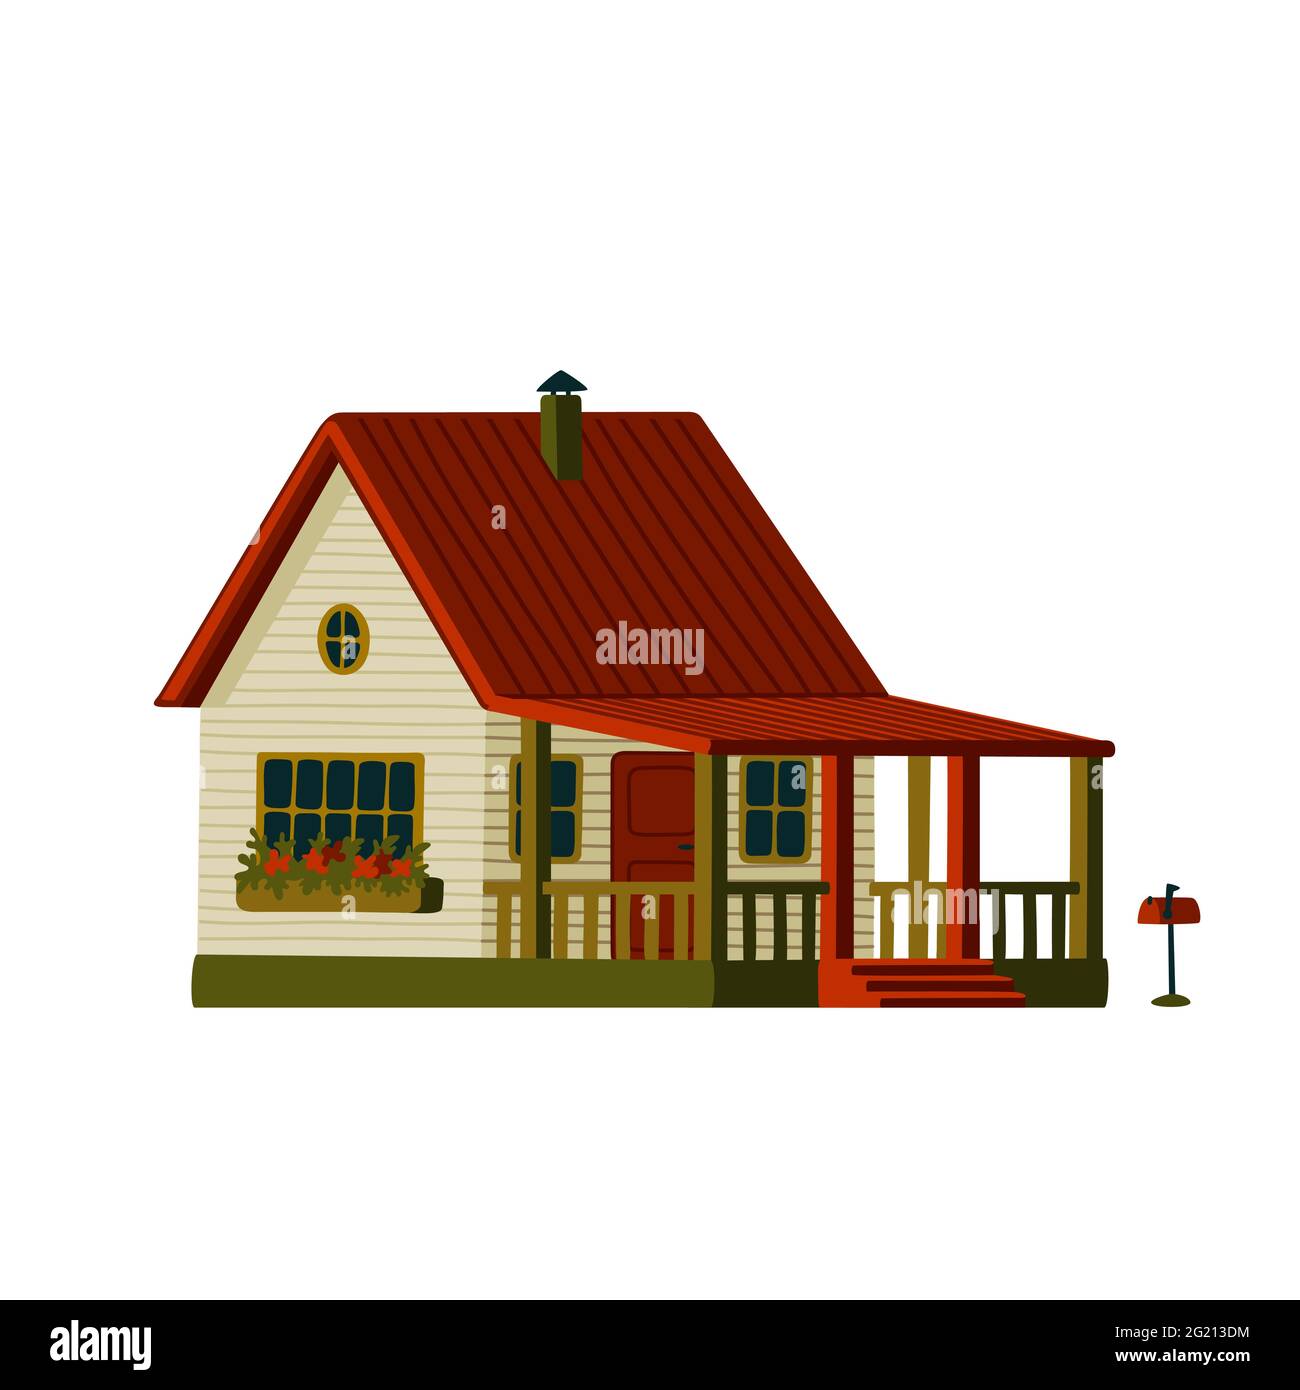 Country house with terrace. Wooden white house in rustic style with red roof. Vector illustration in flat cartoon style on white background Stock Vector